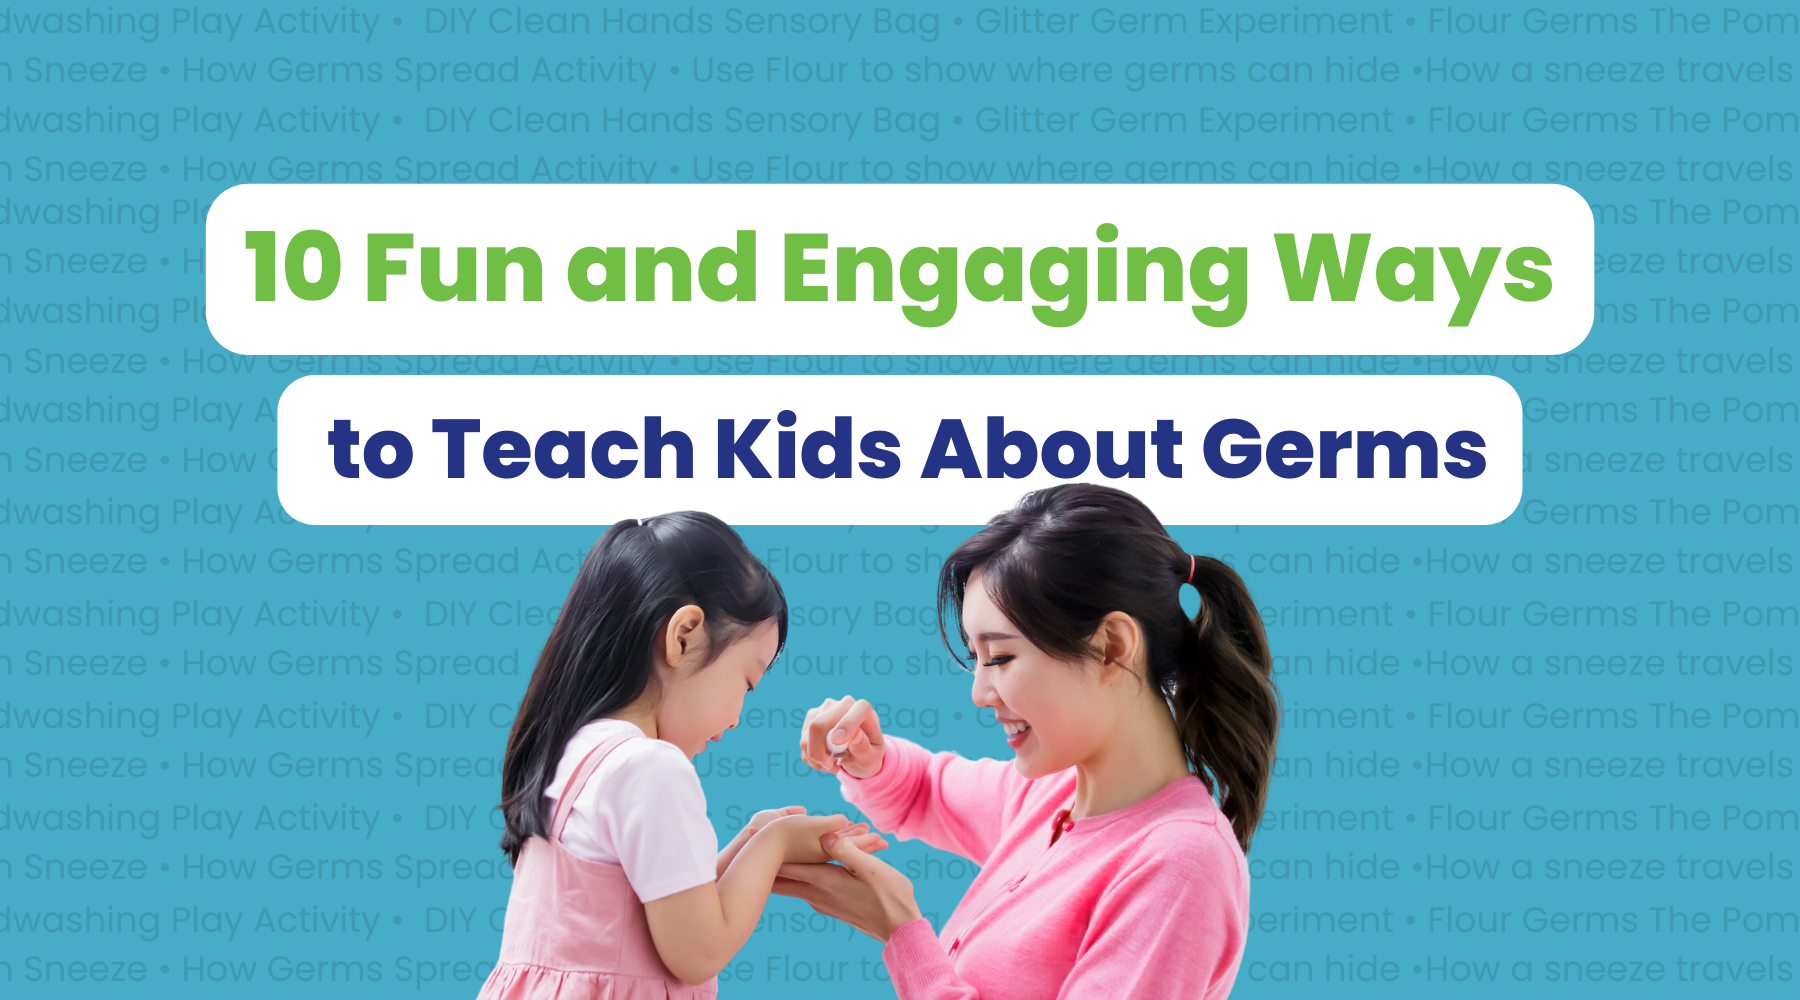 10 Fun and Engaging Ways to Teach Kids about Germs